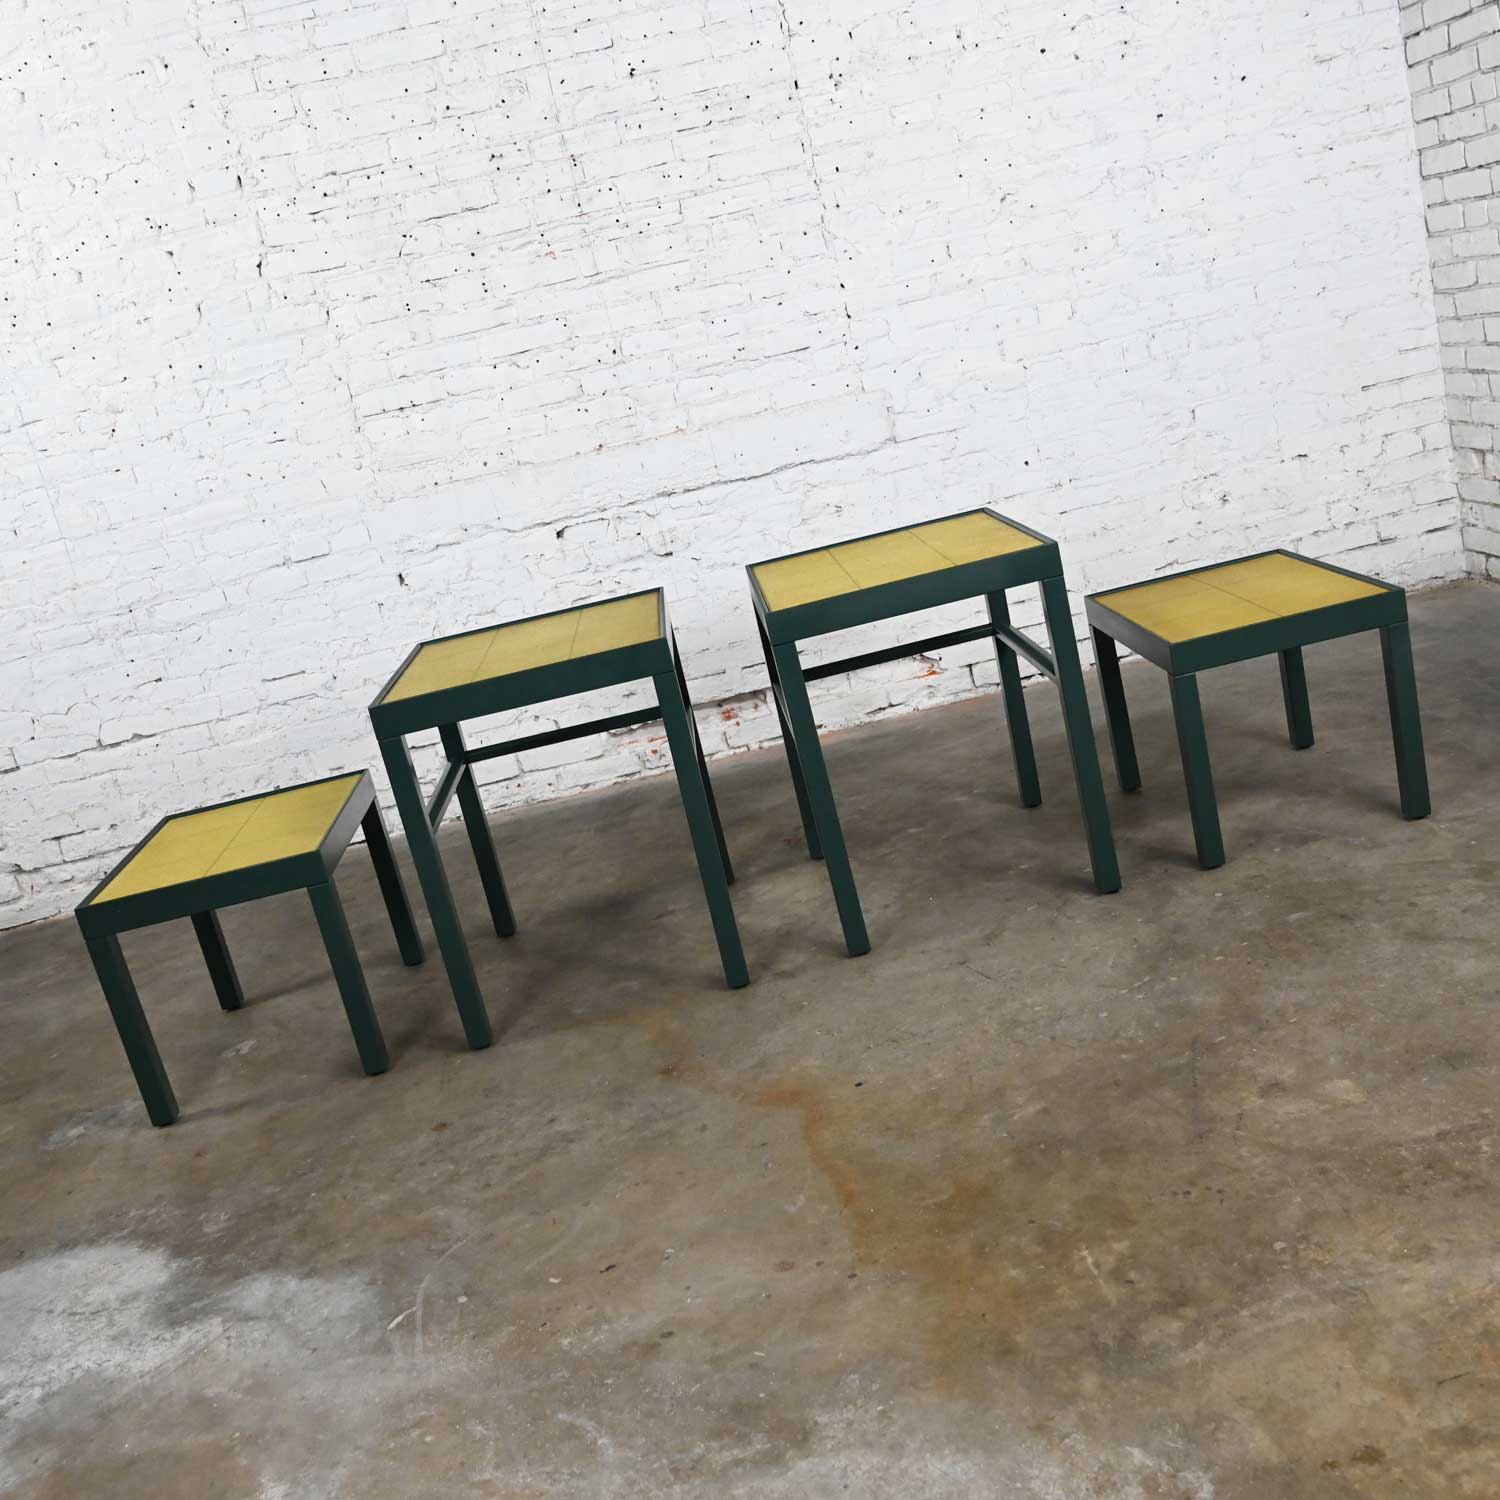 Vintage Campaign Modified Parsons Nesting Tables with Chartreuse Leather Tops 2 Sets of 2 by Kittinger Furniture